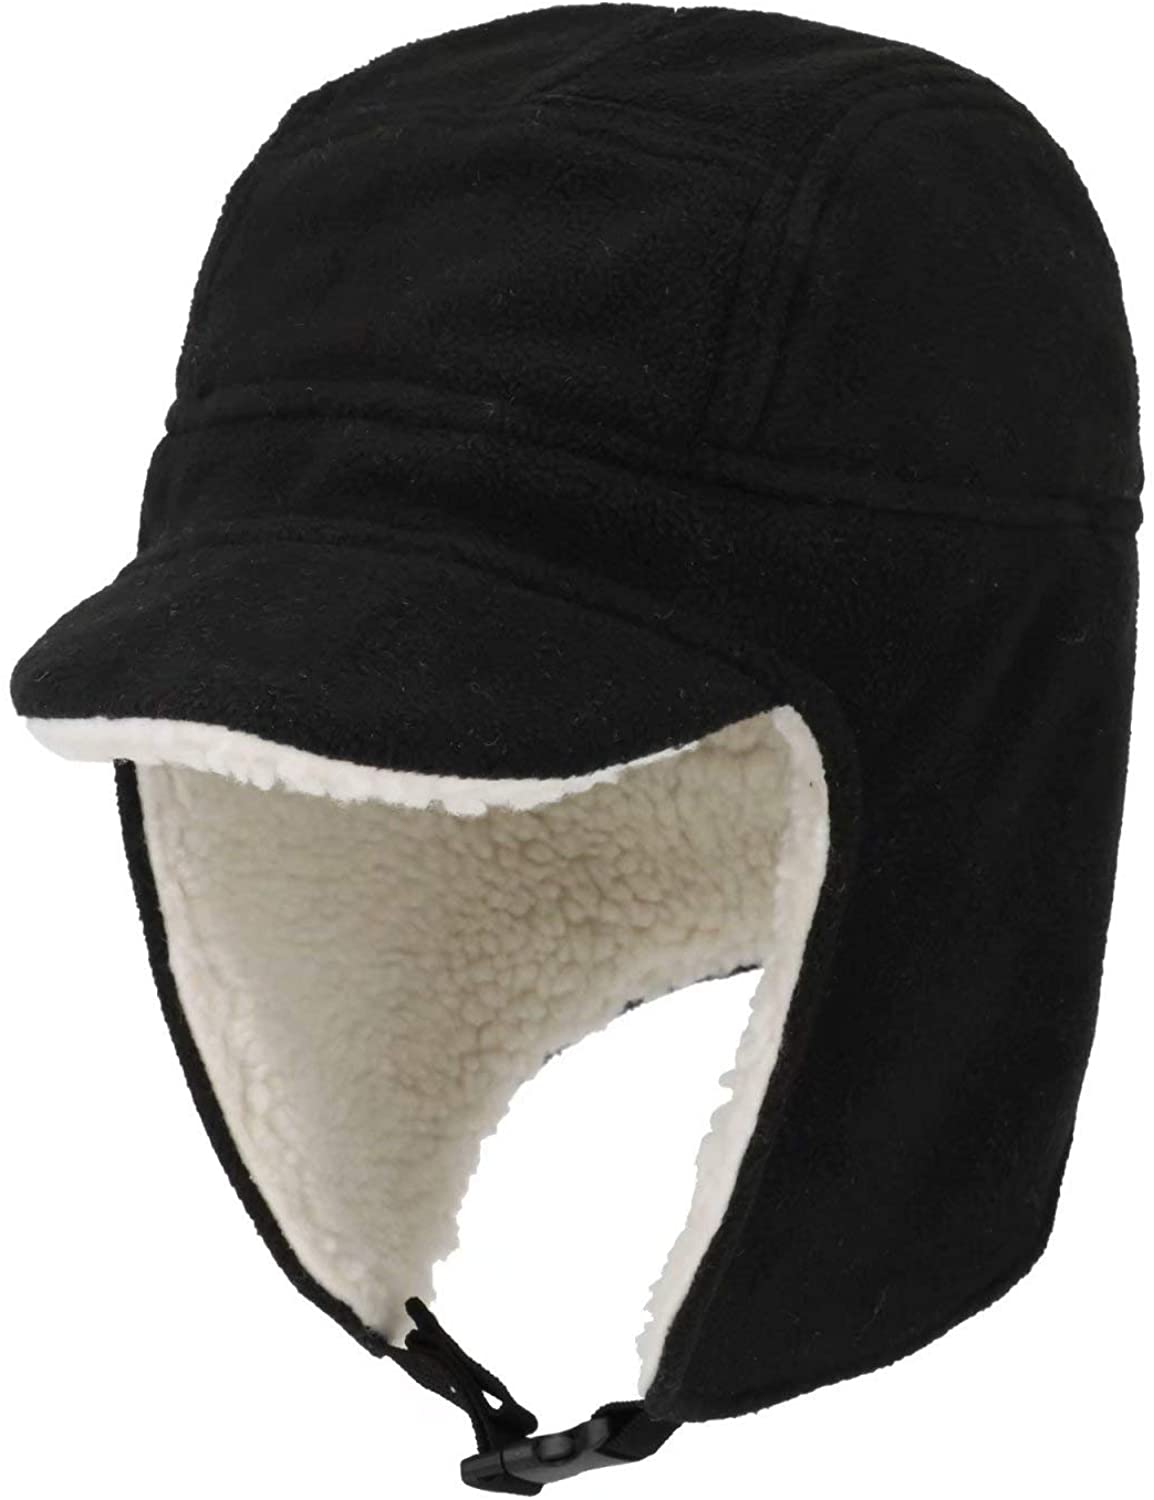 Connectyle Mens Fleece Thermal Skull Cap Beanie with Ear Flaps Winter Hats 